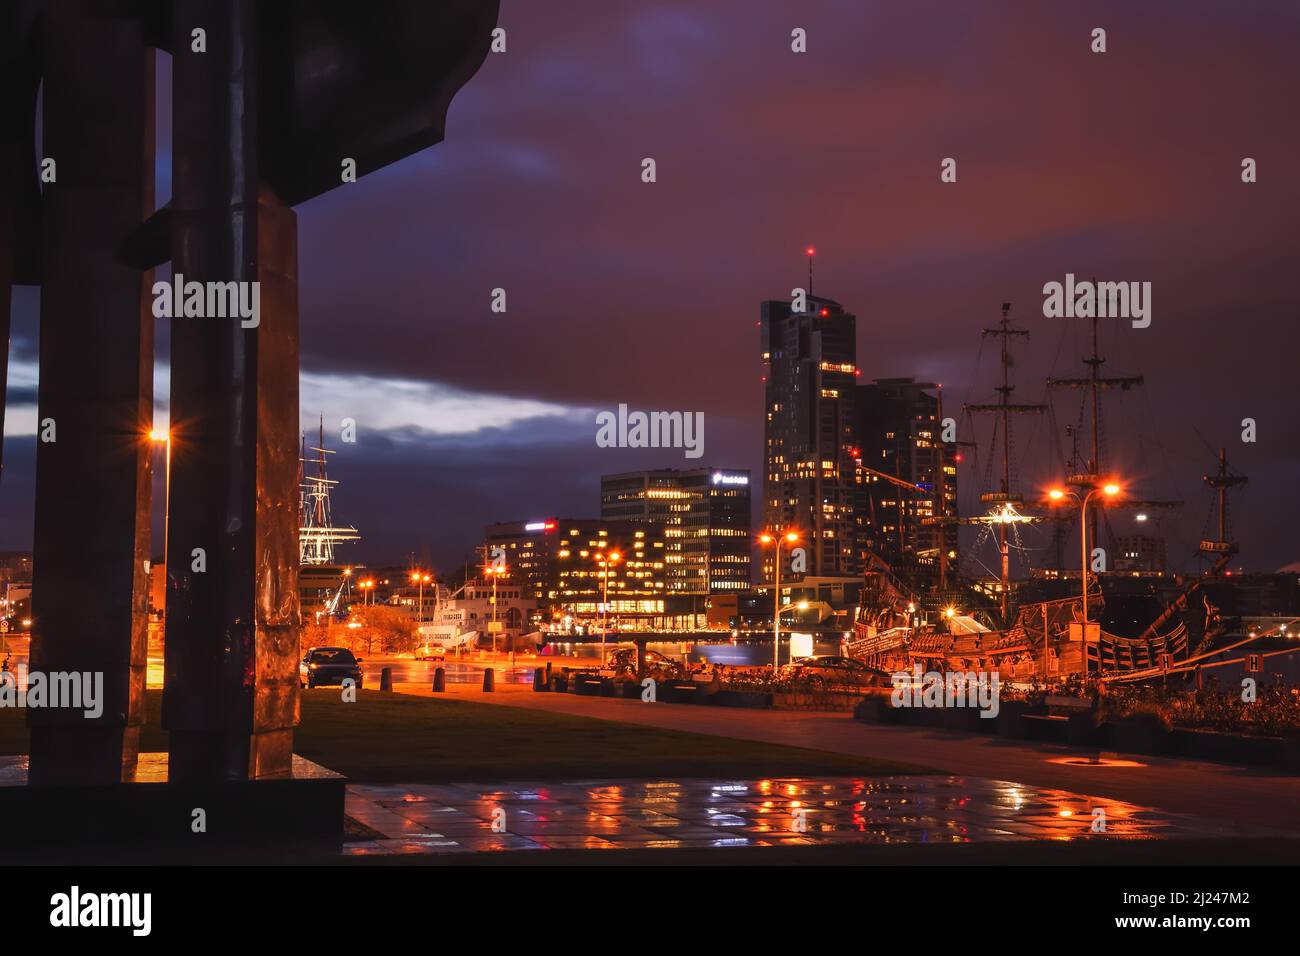 Gdynia, Poland - October 7, 2019: Colorful night shot of the seaside city of Gdynia, Poland. Stock Photo